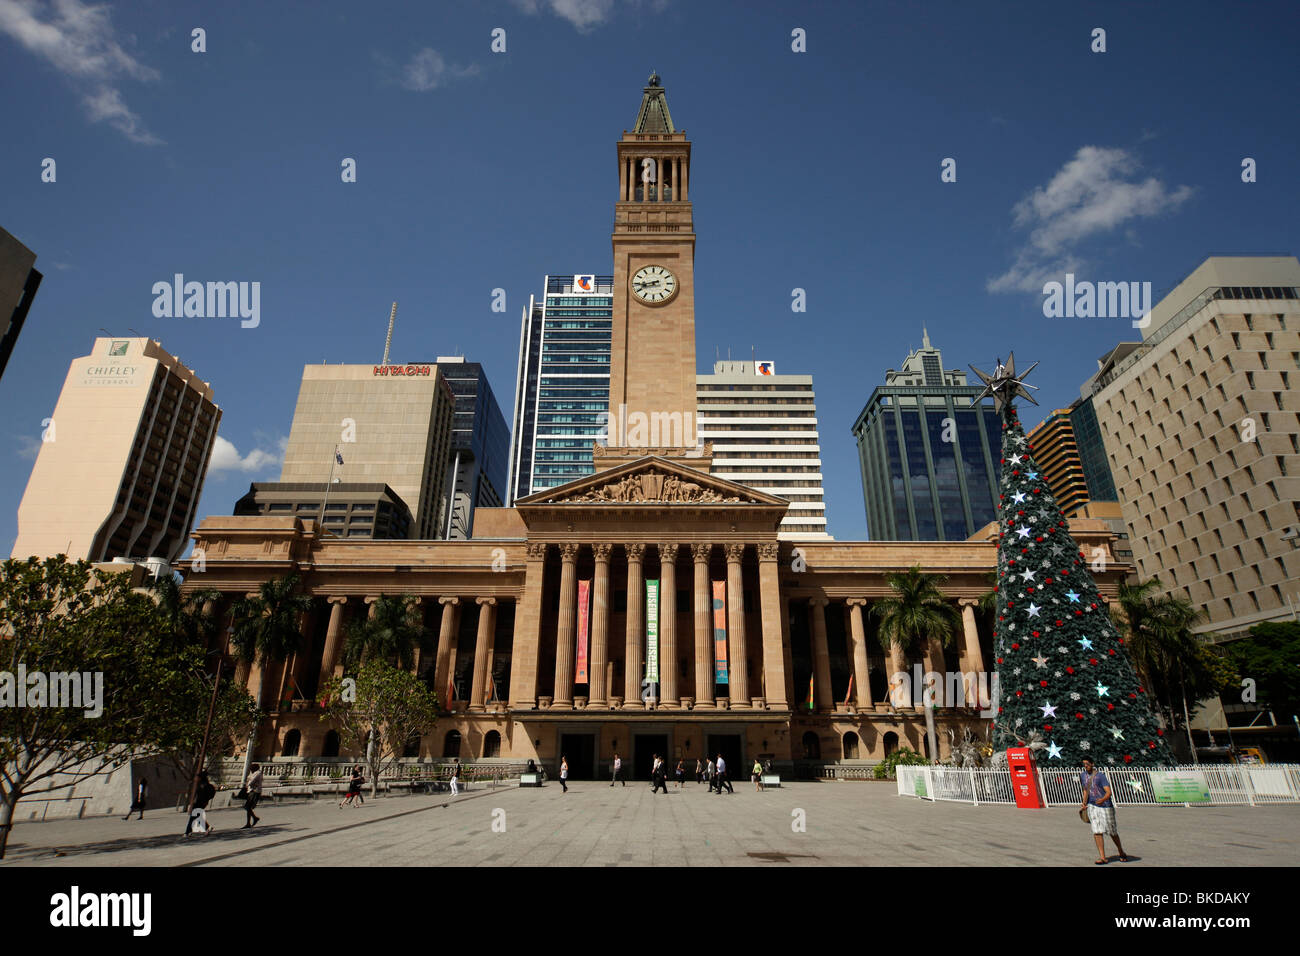 King George Square with City Hall and clock tower in Brisbane, Queensland, Australia Stock Photo